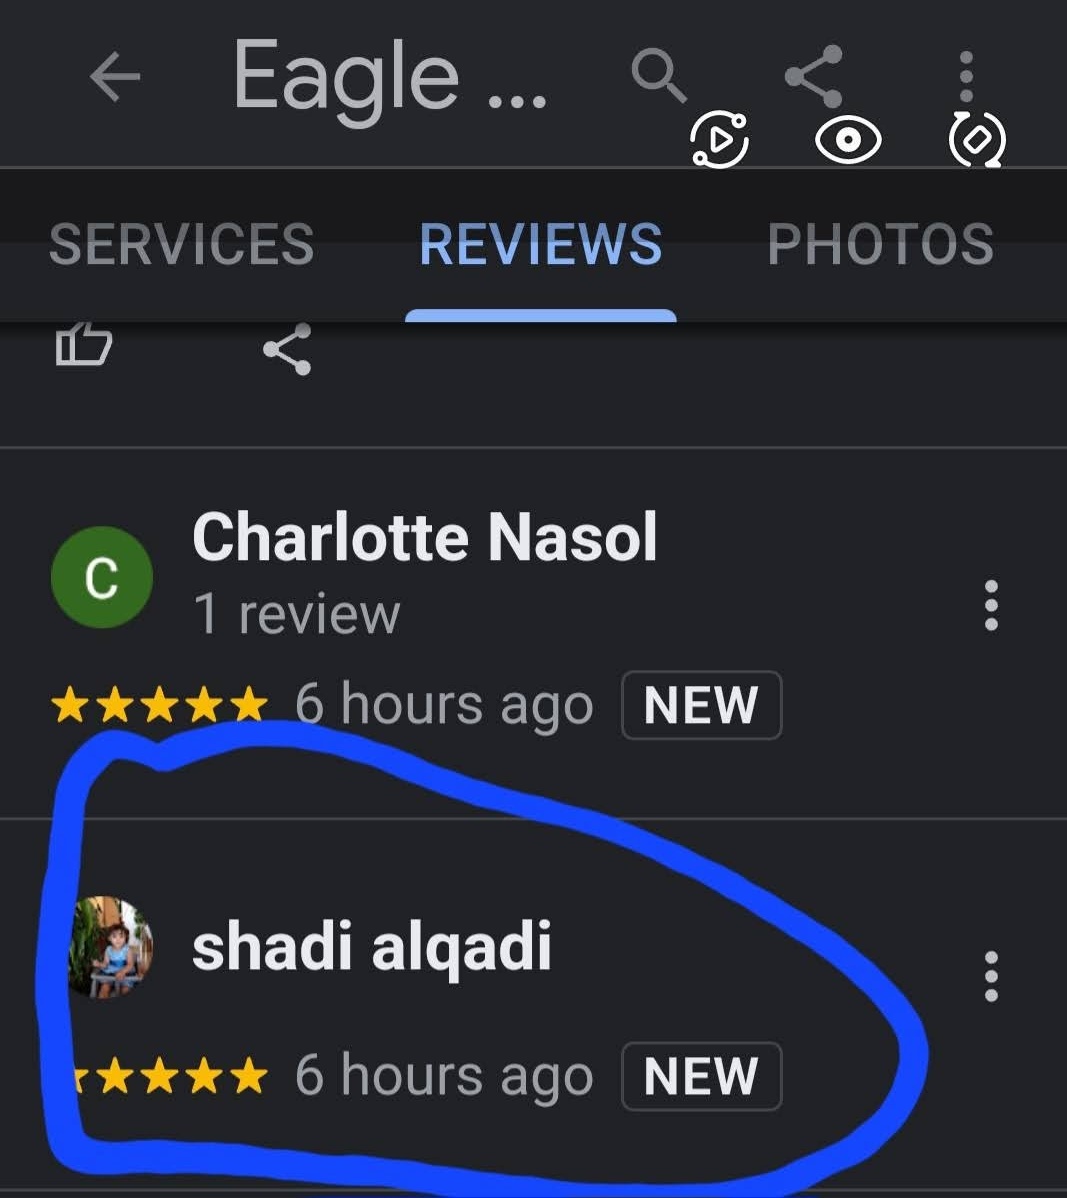 @eagle_enviro removed google review page after 78 of their staff wrote reviews... in 4 hours. Unscrupulous to the core. Where are my boys? @maanabudhabi @A_W_Global @philip_ciwf @Forsan_UAE @HHShkDrSultan @HHShkMohd @HHMansoor @AbuDhabiMedia @AbuDhabi_ADM @Shamma_AlNahyan #cats